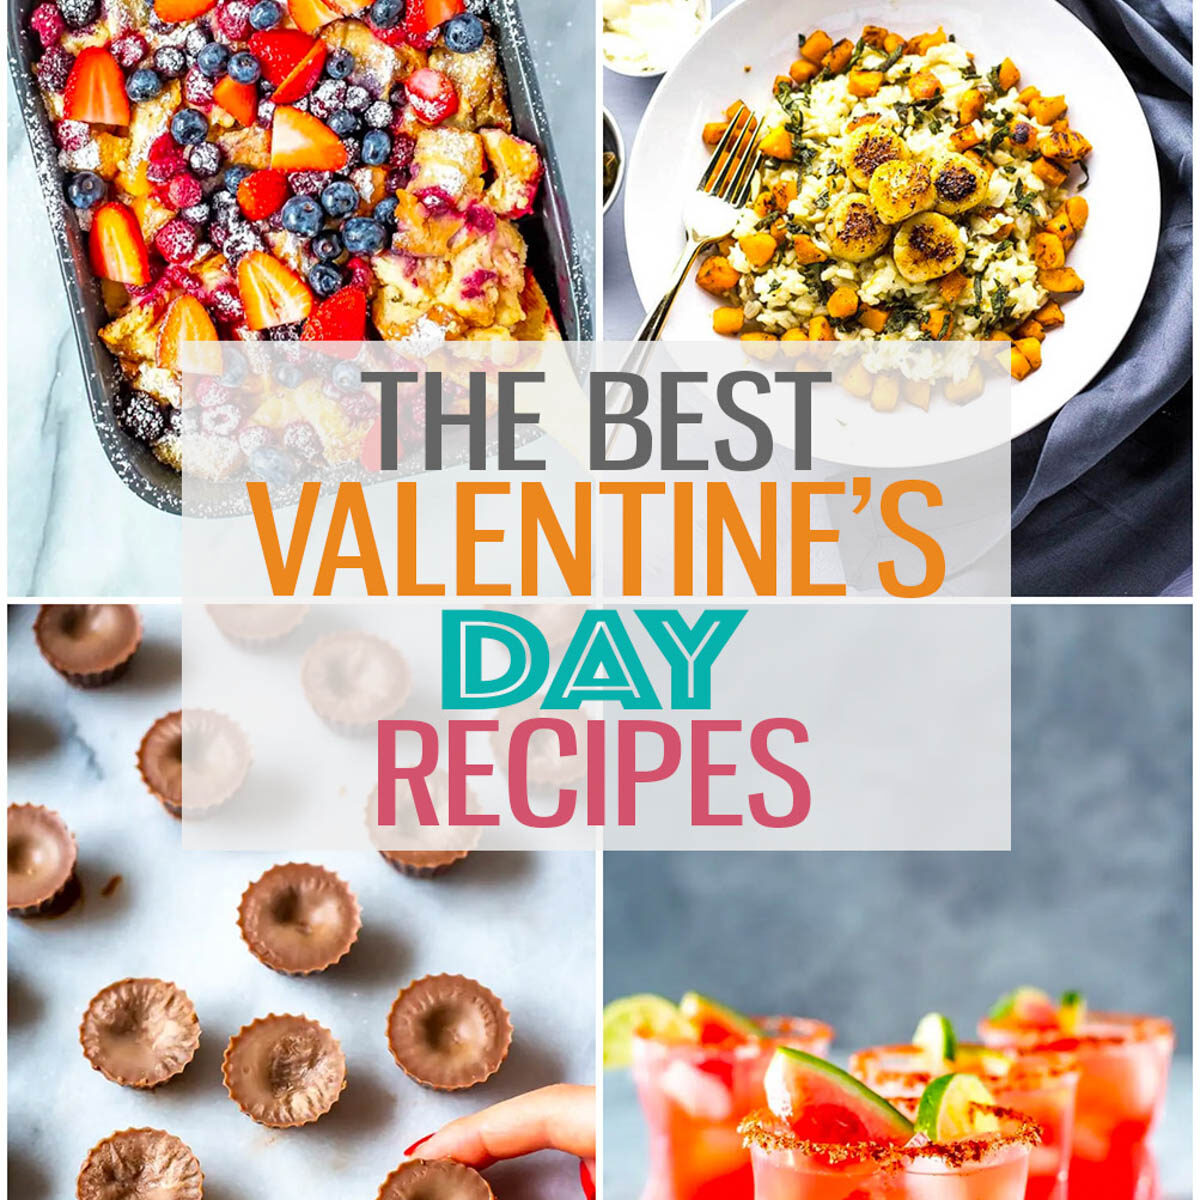 A collage of four different Valentine's Day recipes with the text "The Best Valentine's Day Recipes" layered over top.